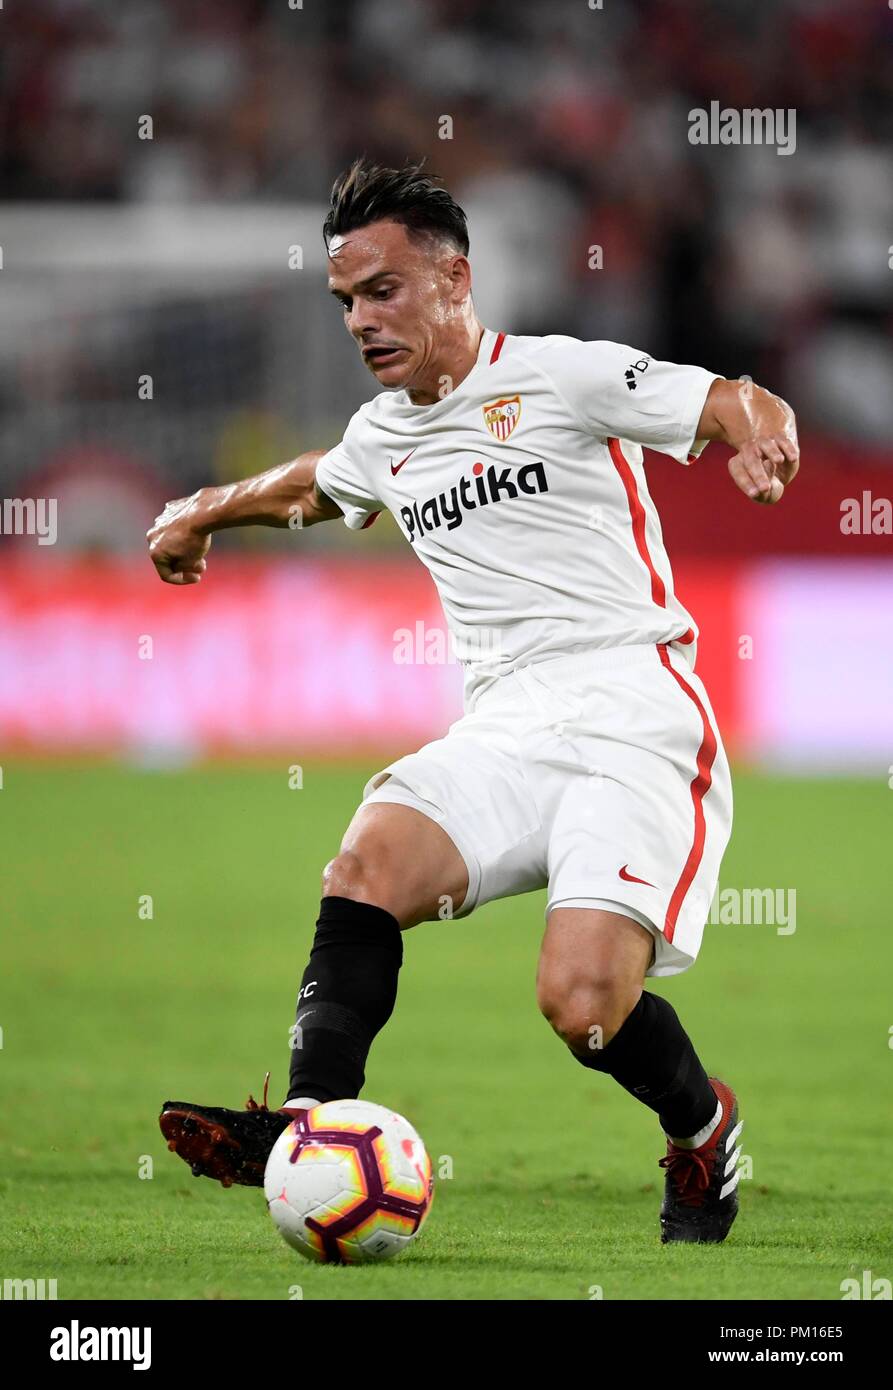 Roque mesa of sevilla fc in action during hi-res stock photography and  images - Alamy